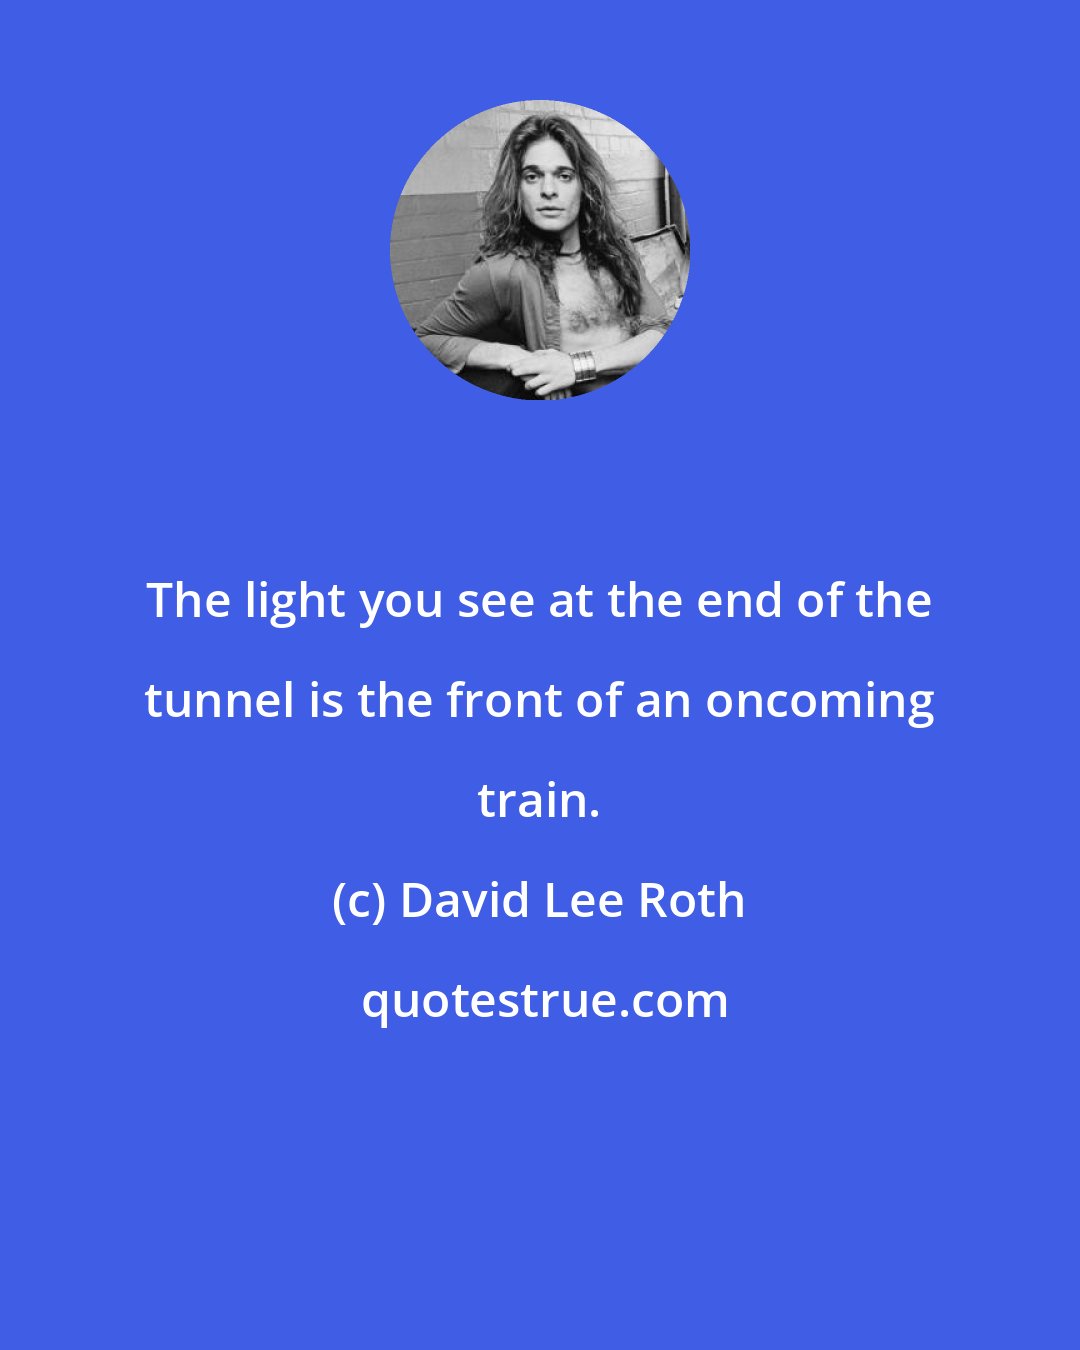 David Lee Roth: The light you see at the end of the tunnel is the front of an oncoming train.